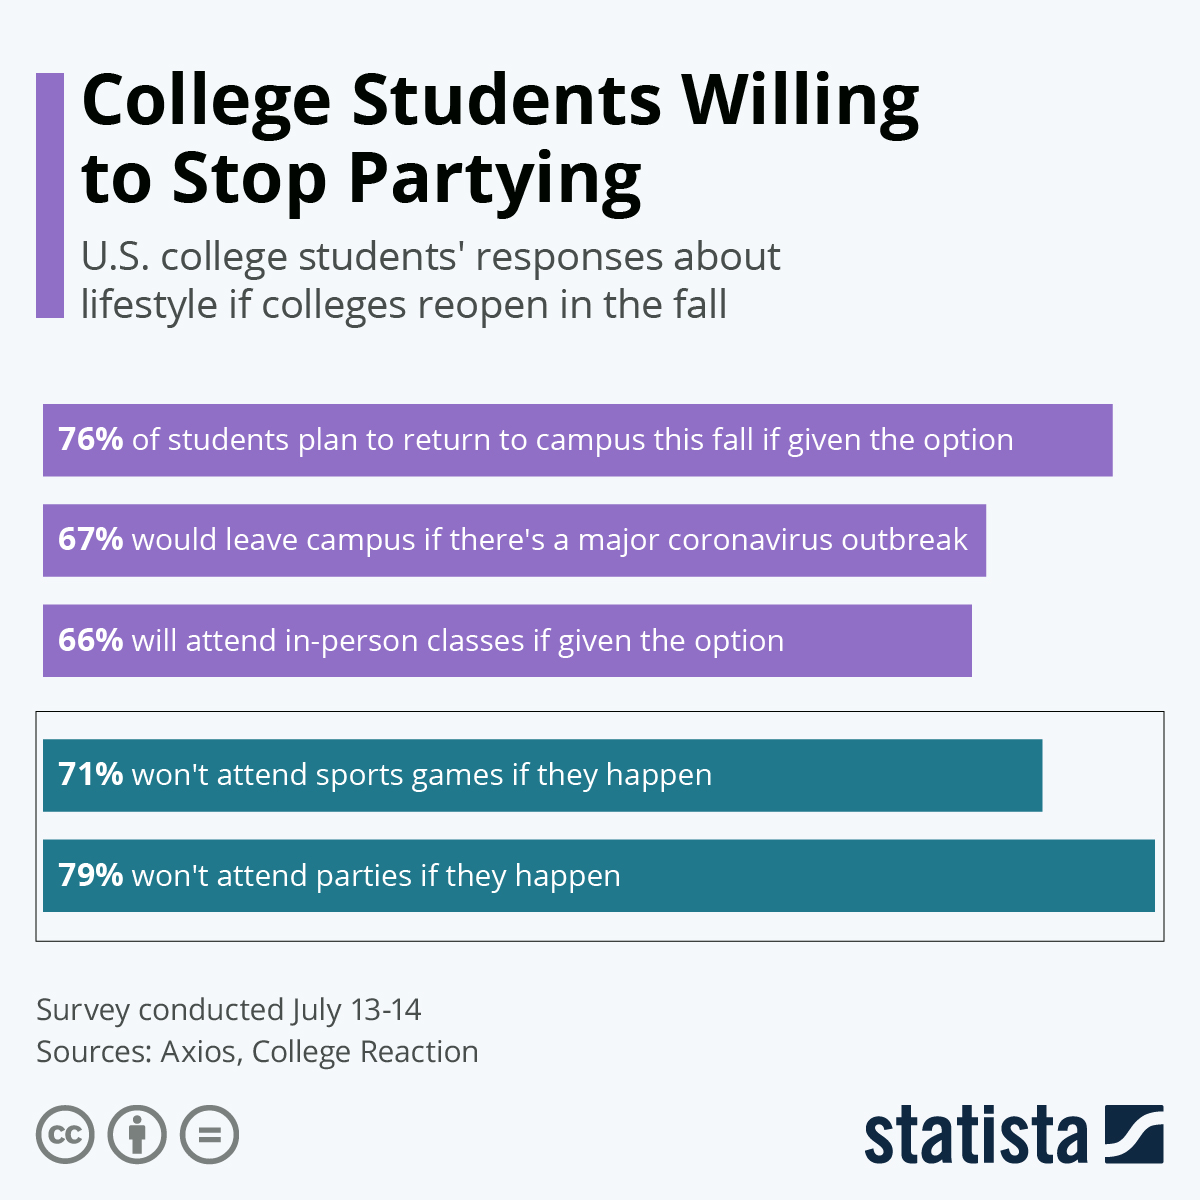 College Students Willing to Stop Partying